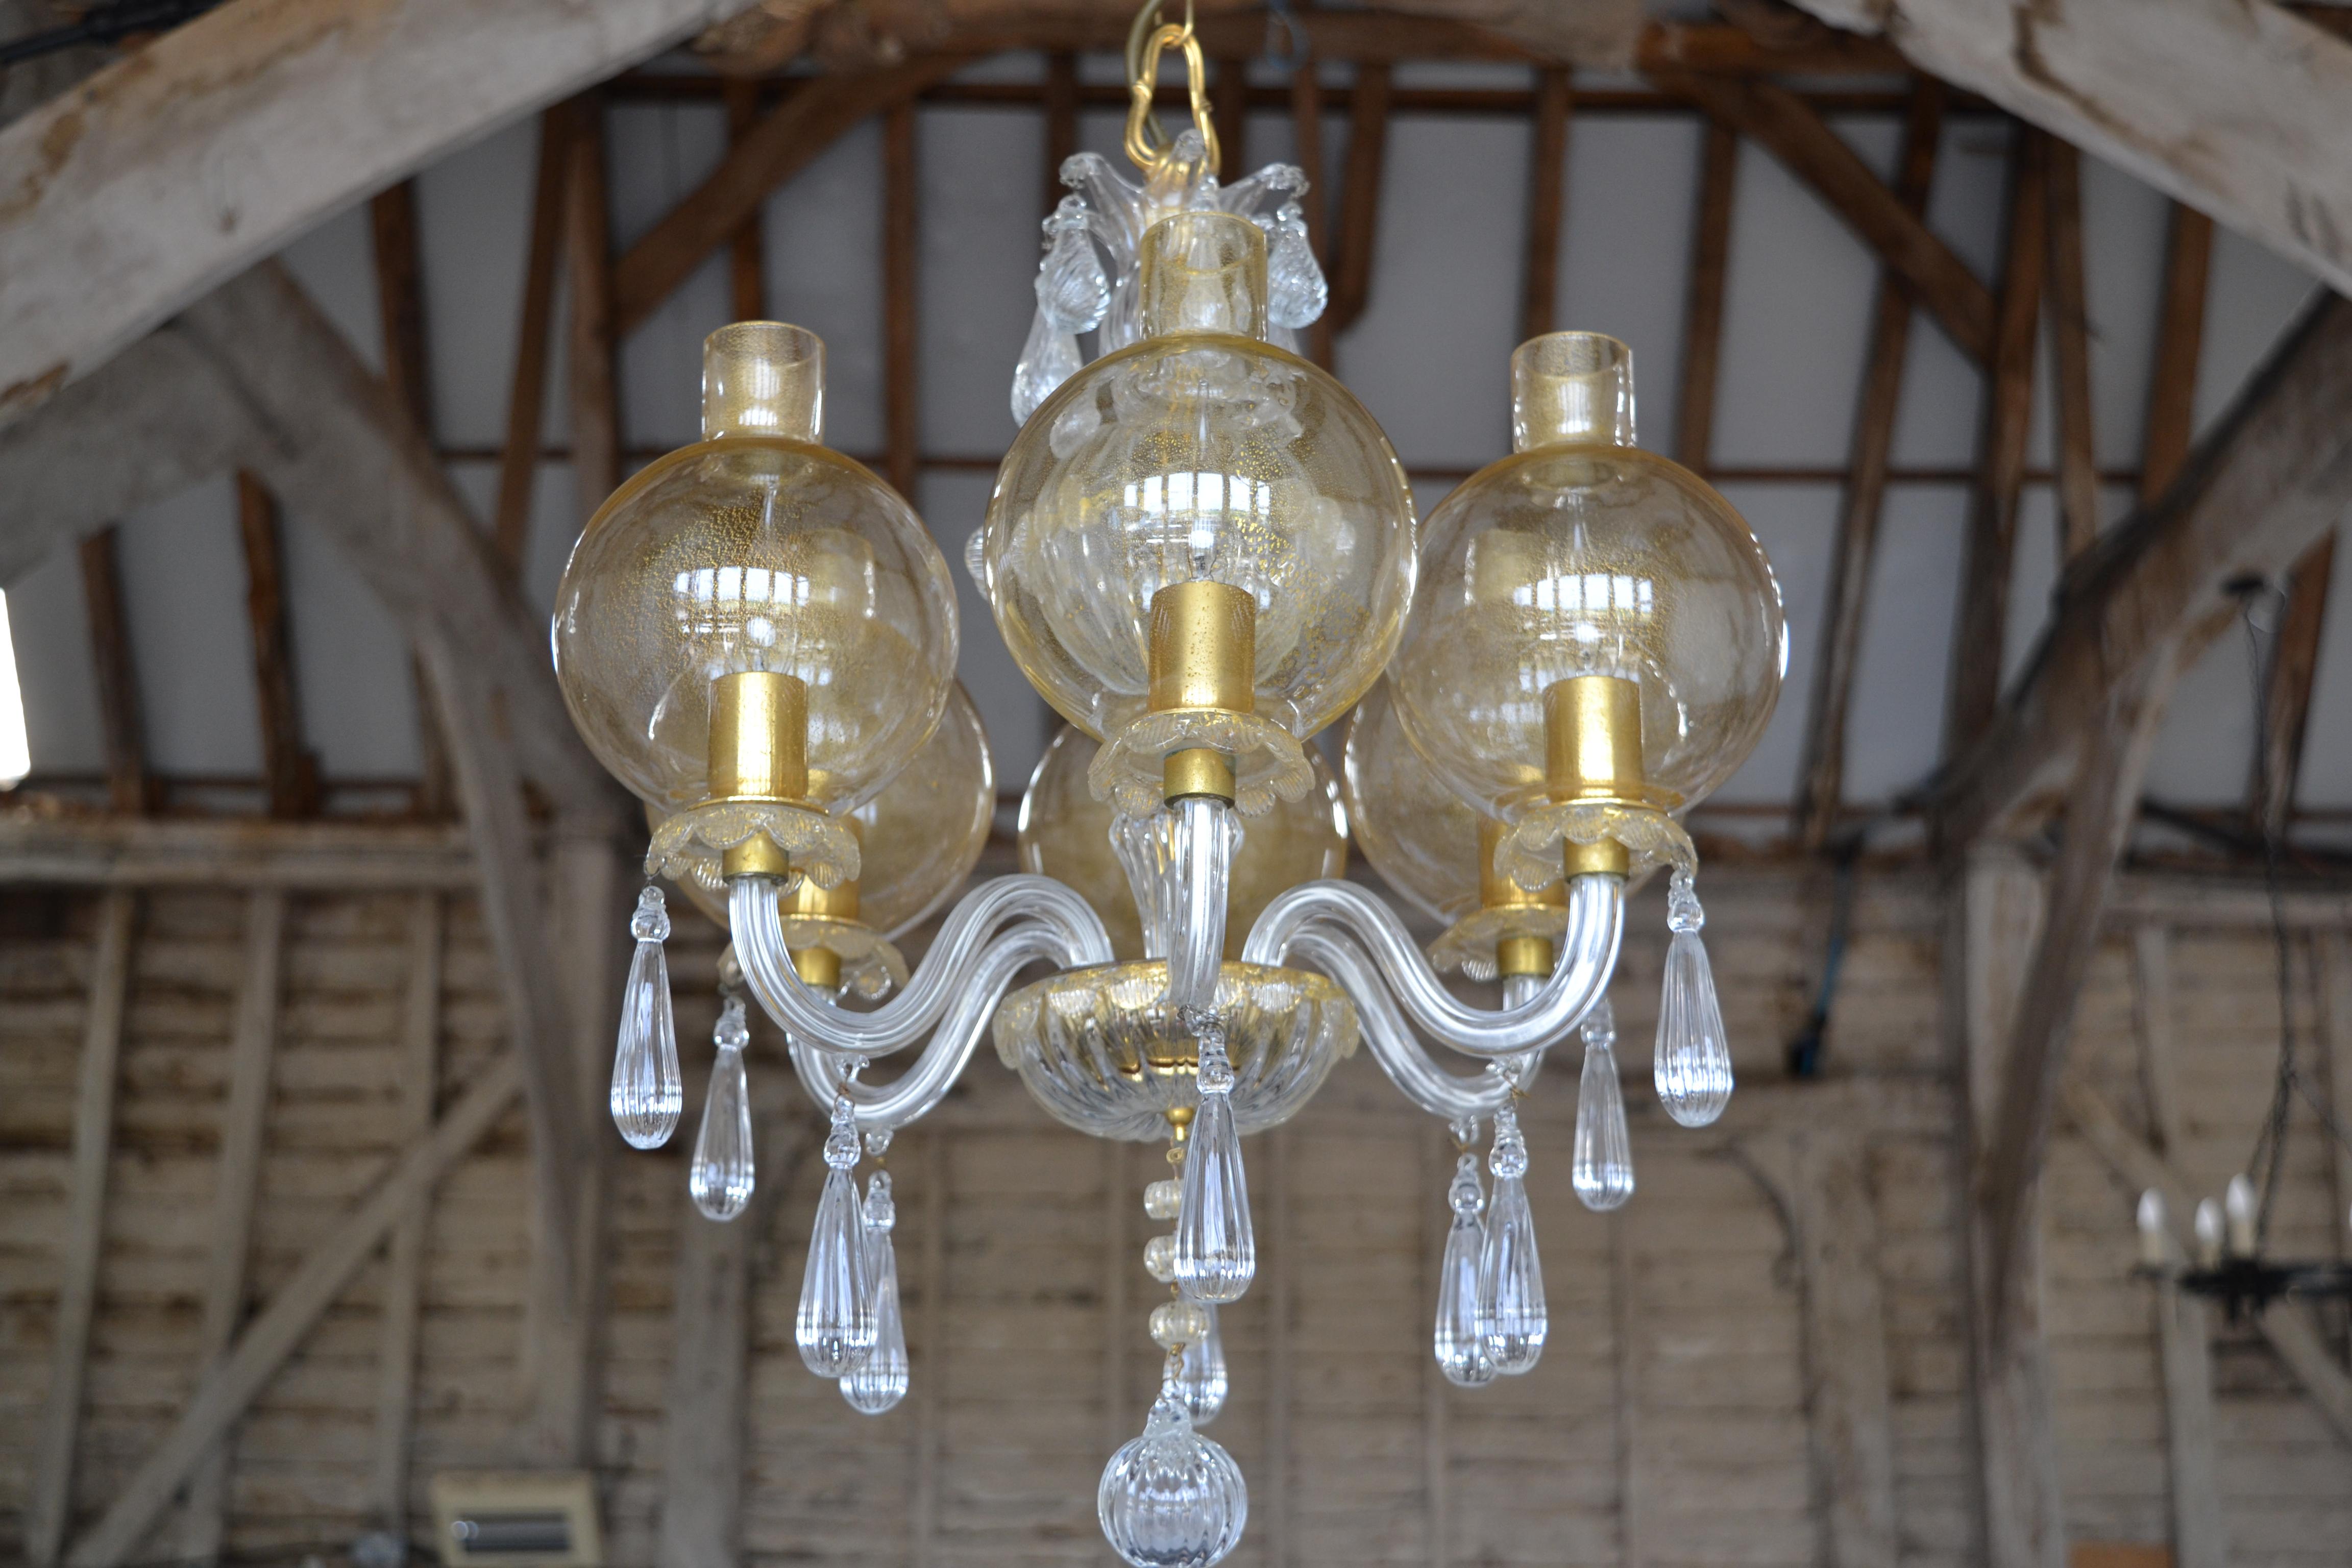 20th Century Mid-Century Venetian 6 light Chandelier with unusual Gold Storm Shades  For Sale